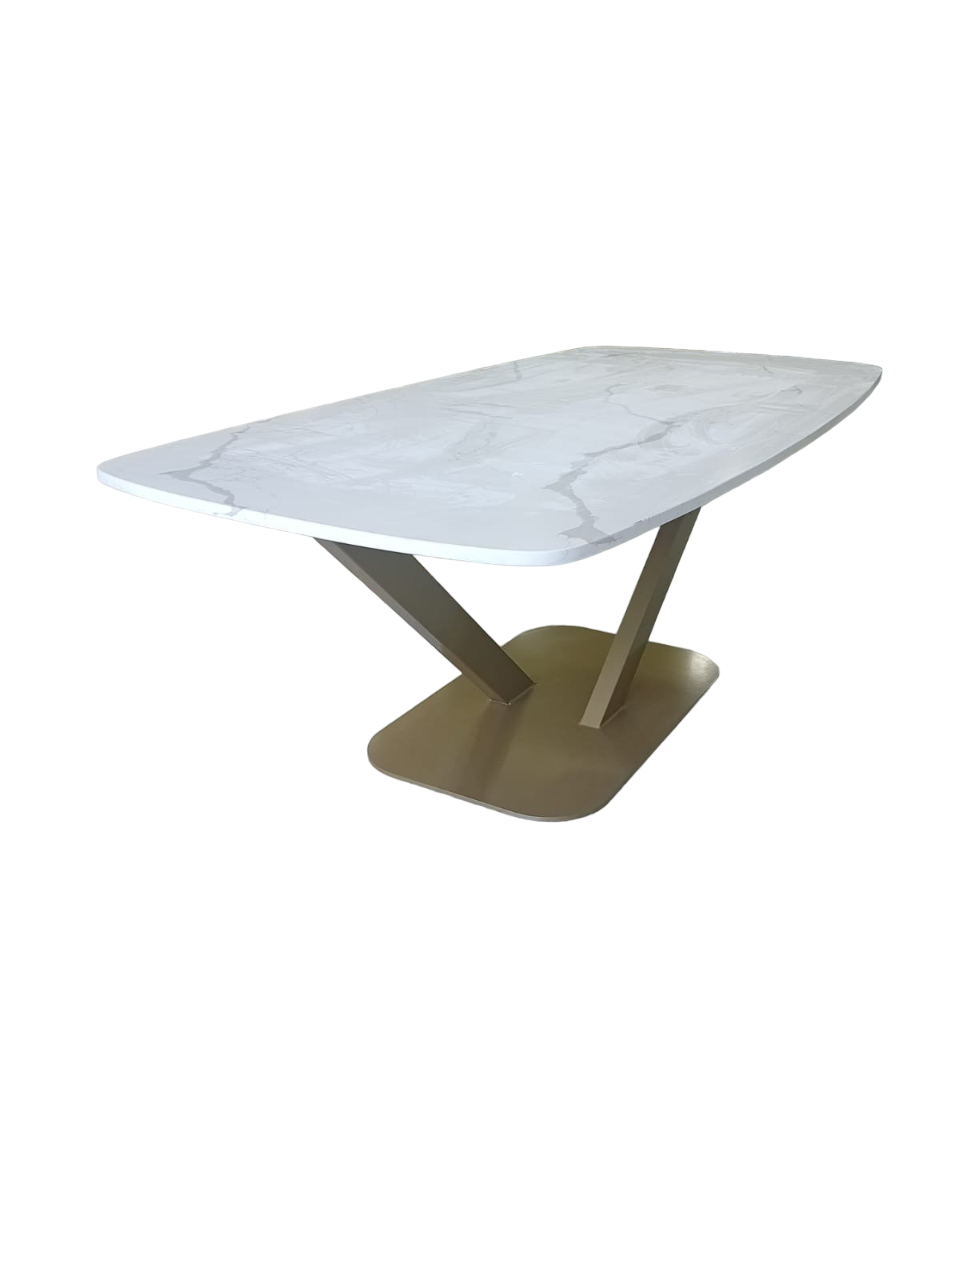 Custom made stone-top dining table with gold brass legs.